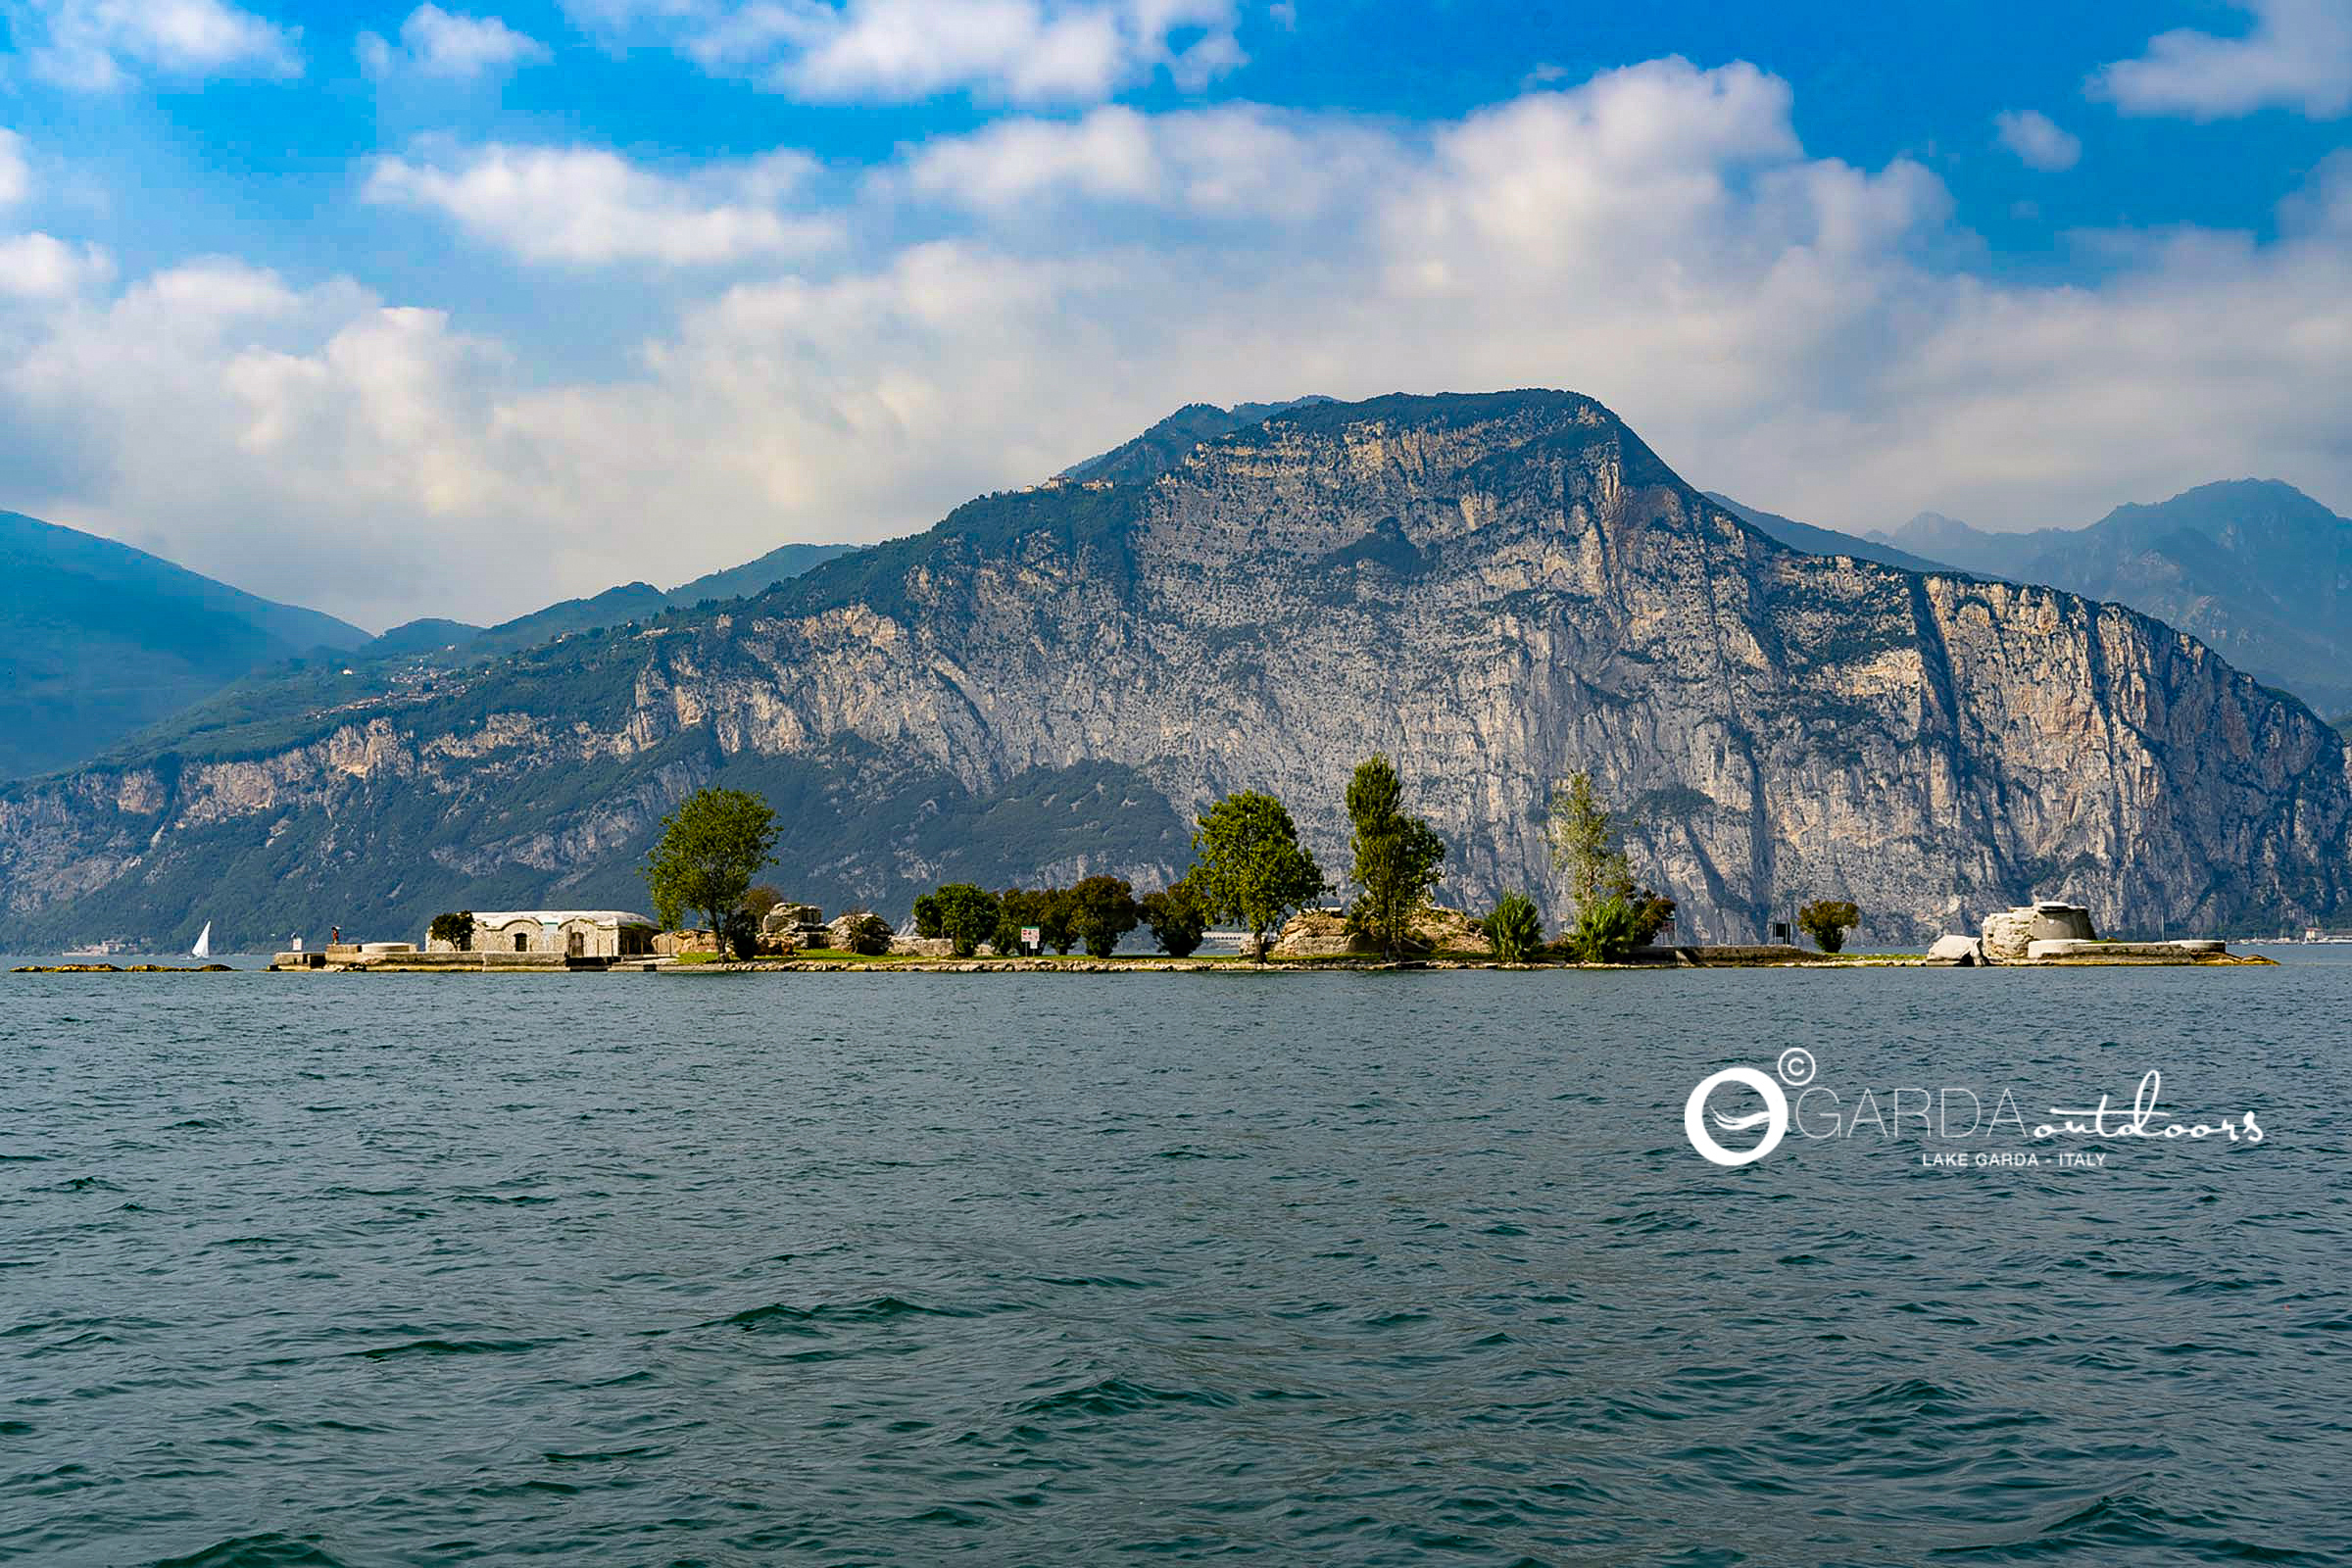 The 5 islands of Lake Garda. What if they were 6? 